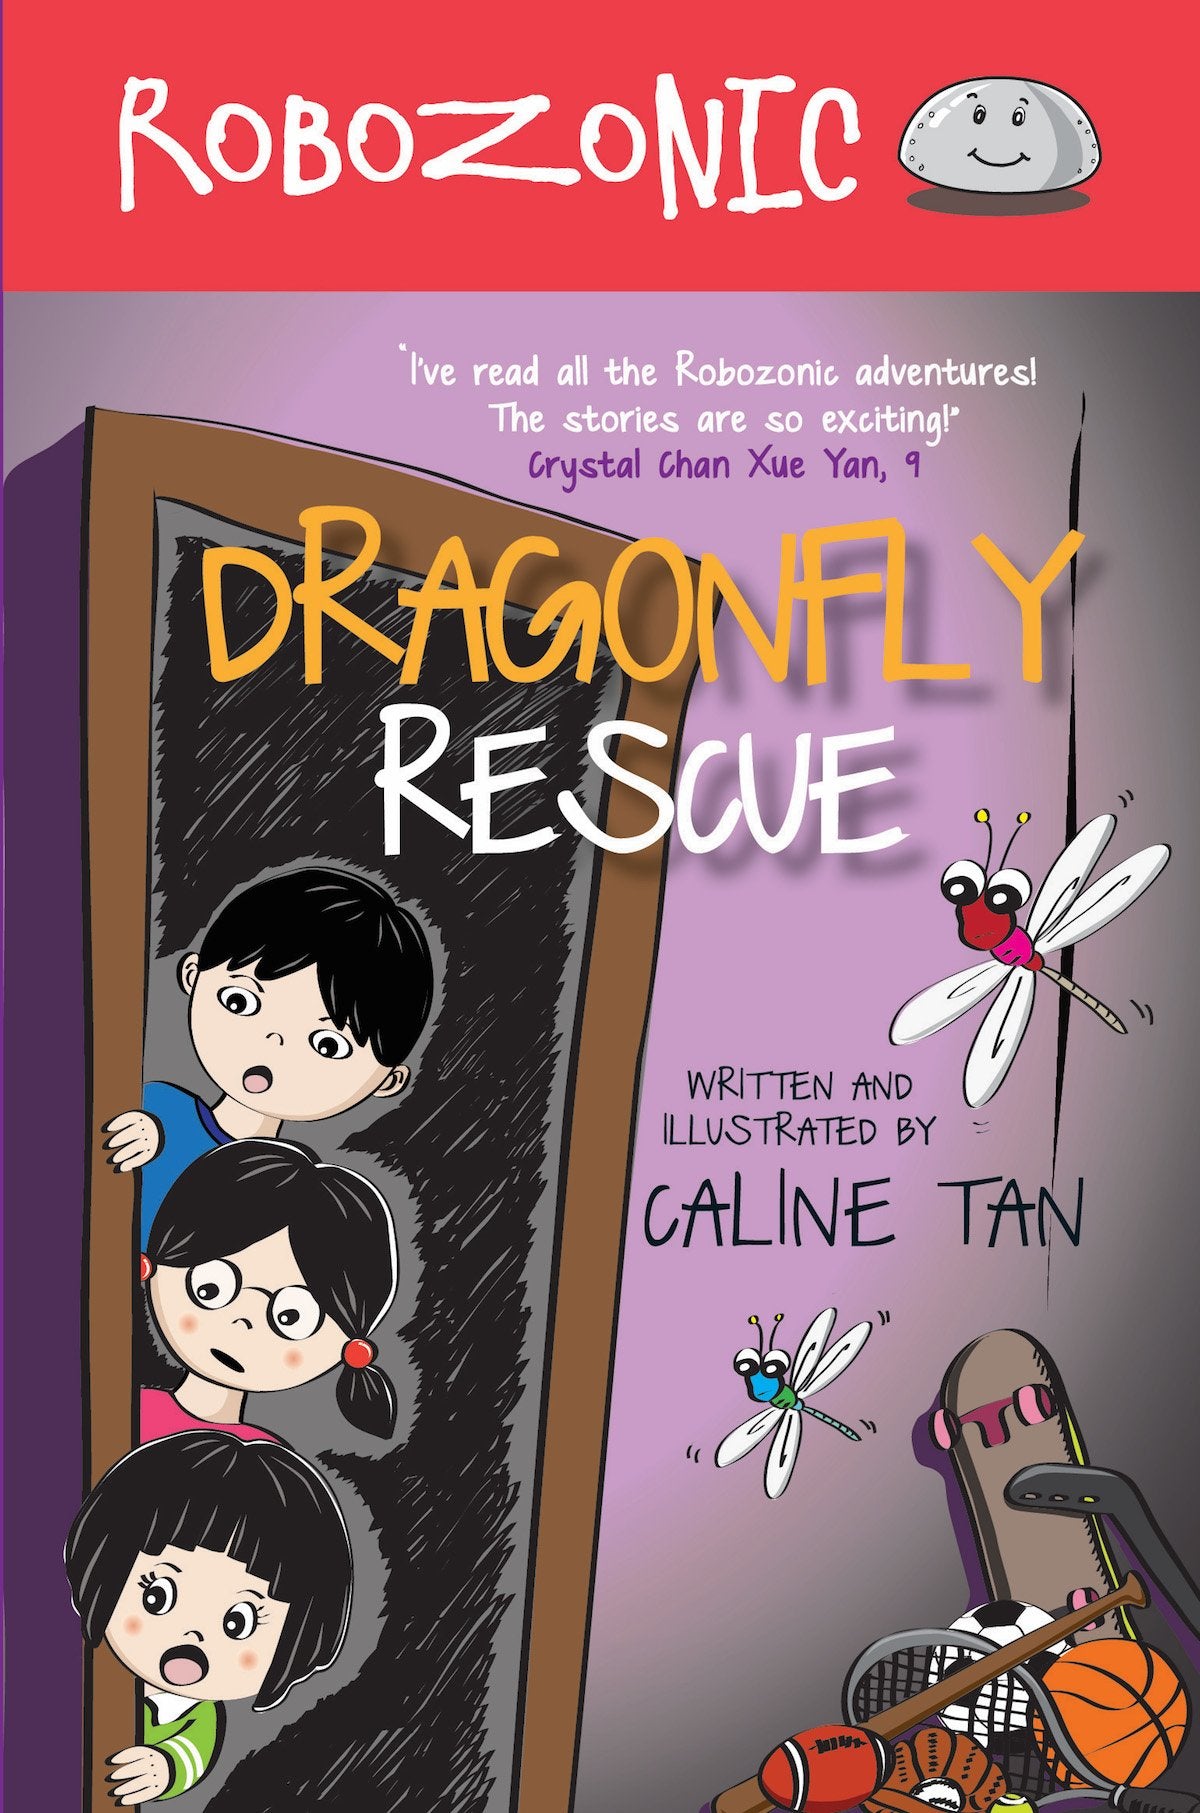 Robozonic: Dragonfly Rescue (book 5)